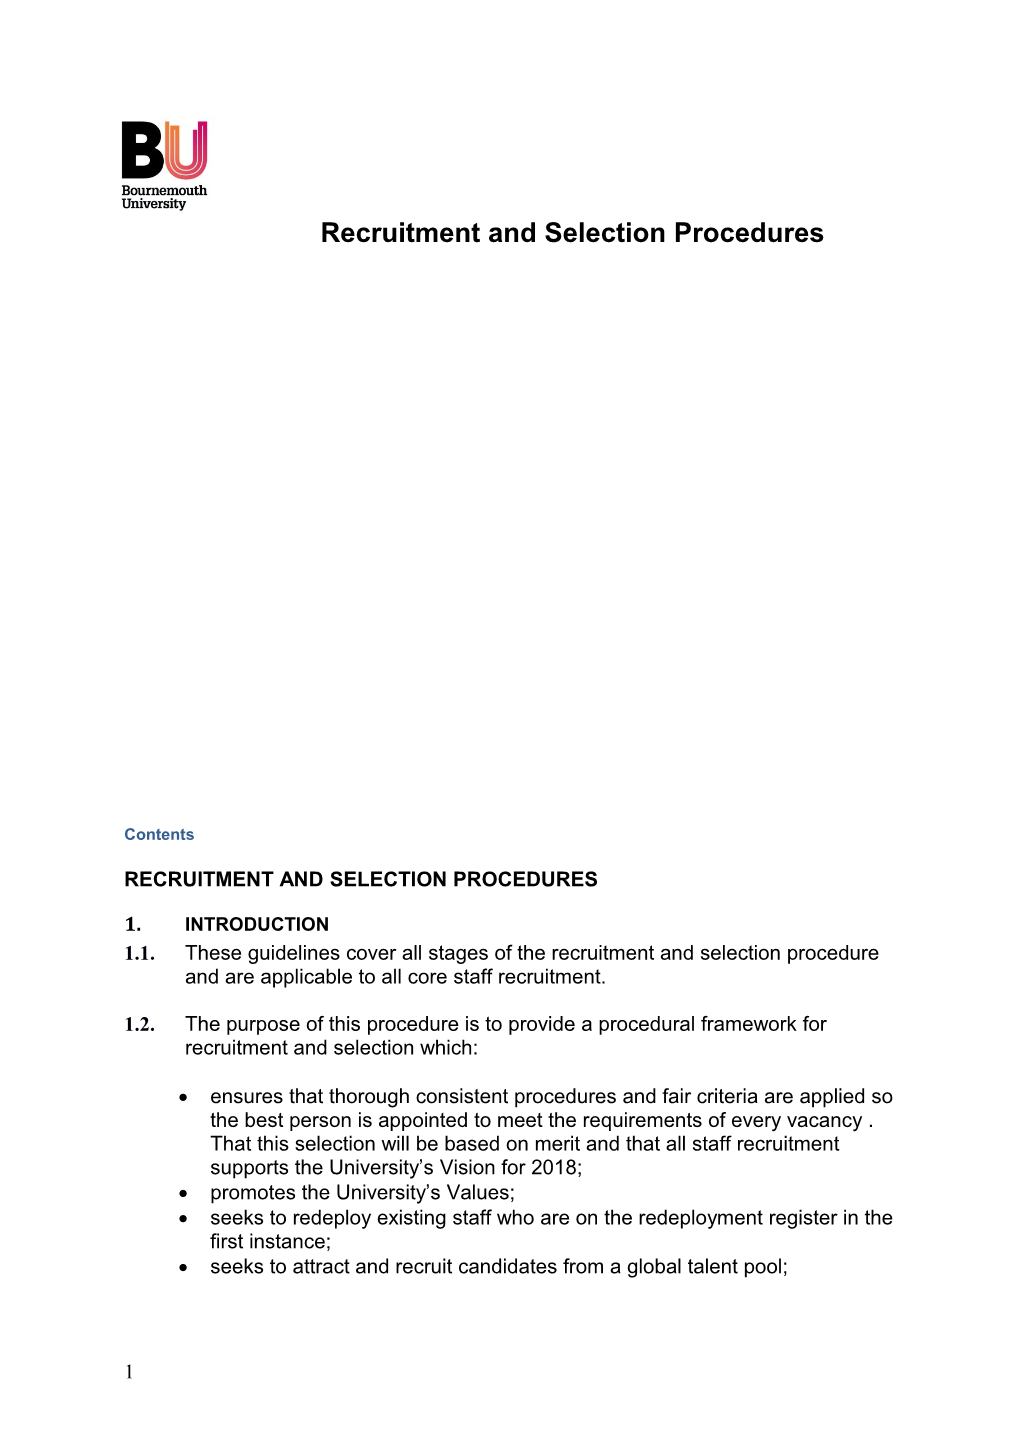 Recruitment and Selection Procedures